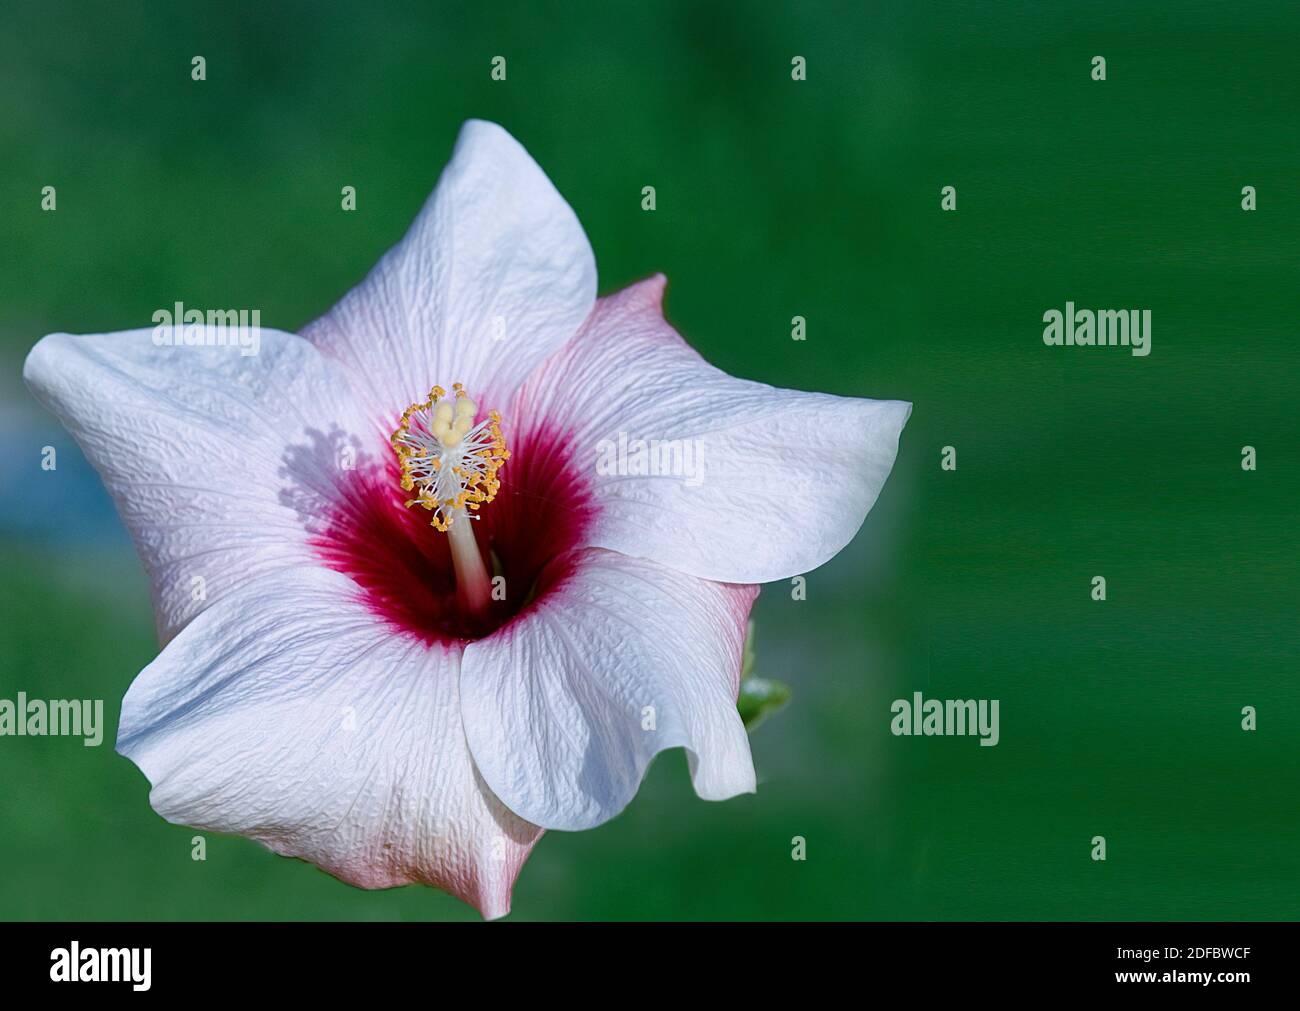 Hibiscus Syriacus Flower Head. Isolated. Copy Space.  Pink with white flower head in full bloom. Room to write. Stock Image. Stock Photo